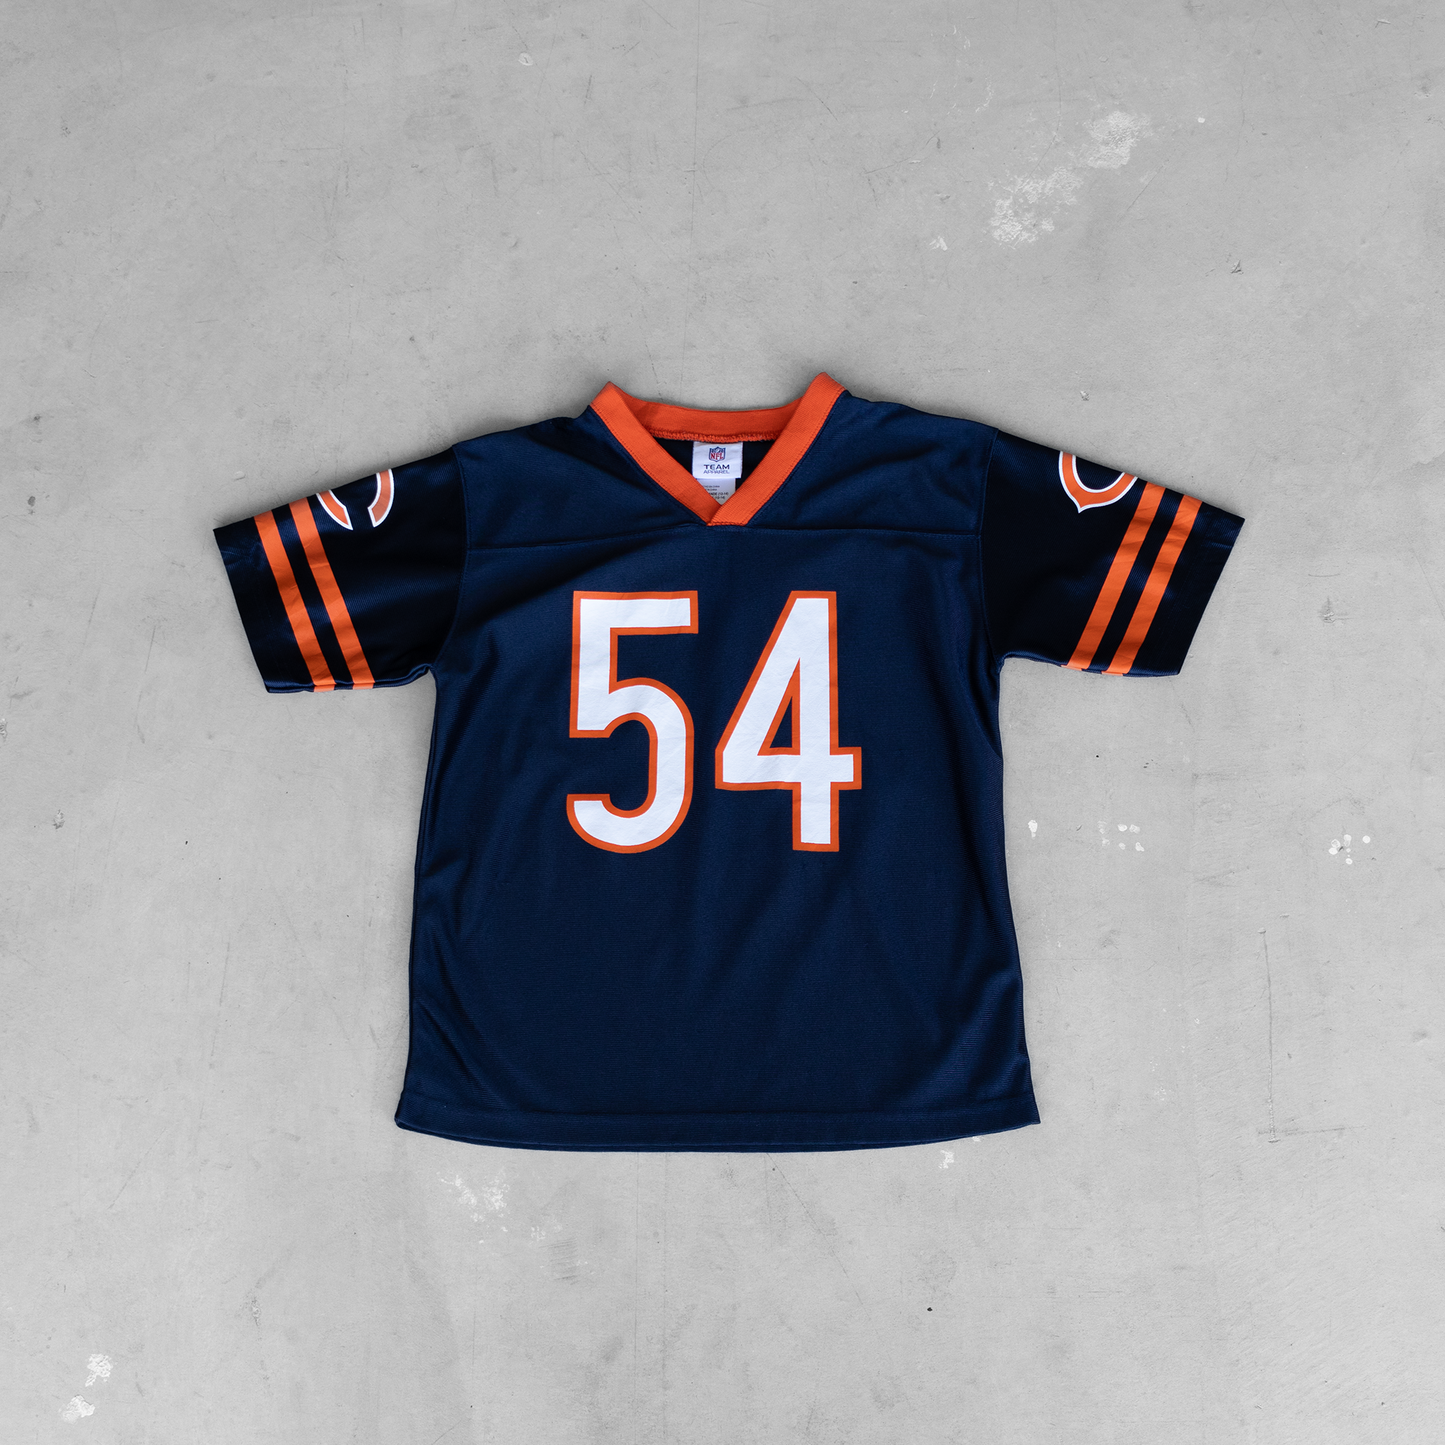 Vintage NFL Chicago Bears Brian Urlacher #54 Youth Football Jersey (L)